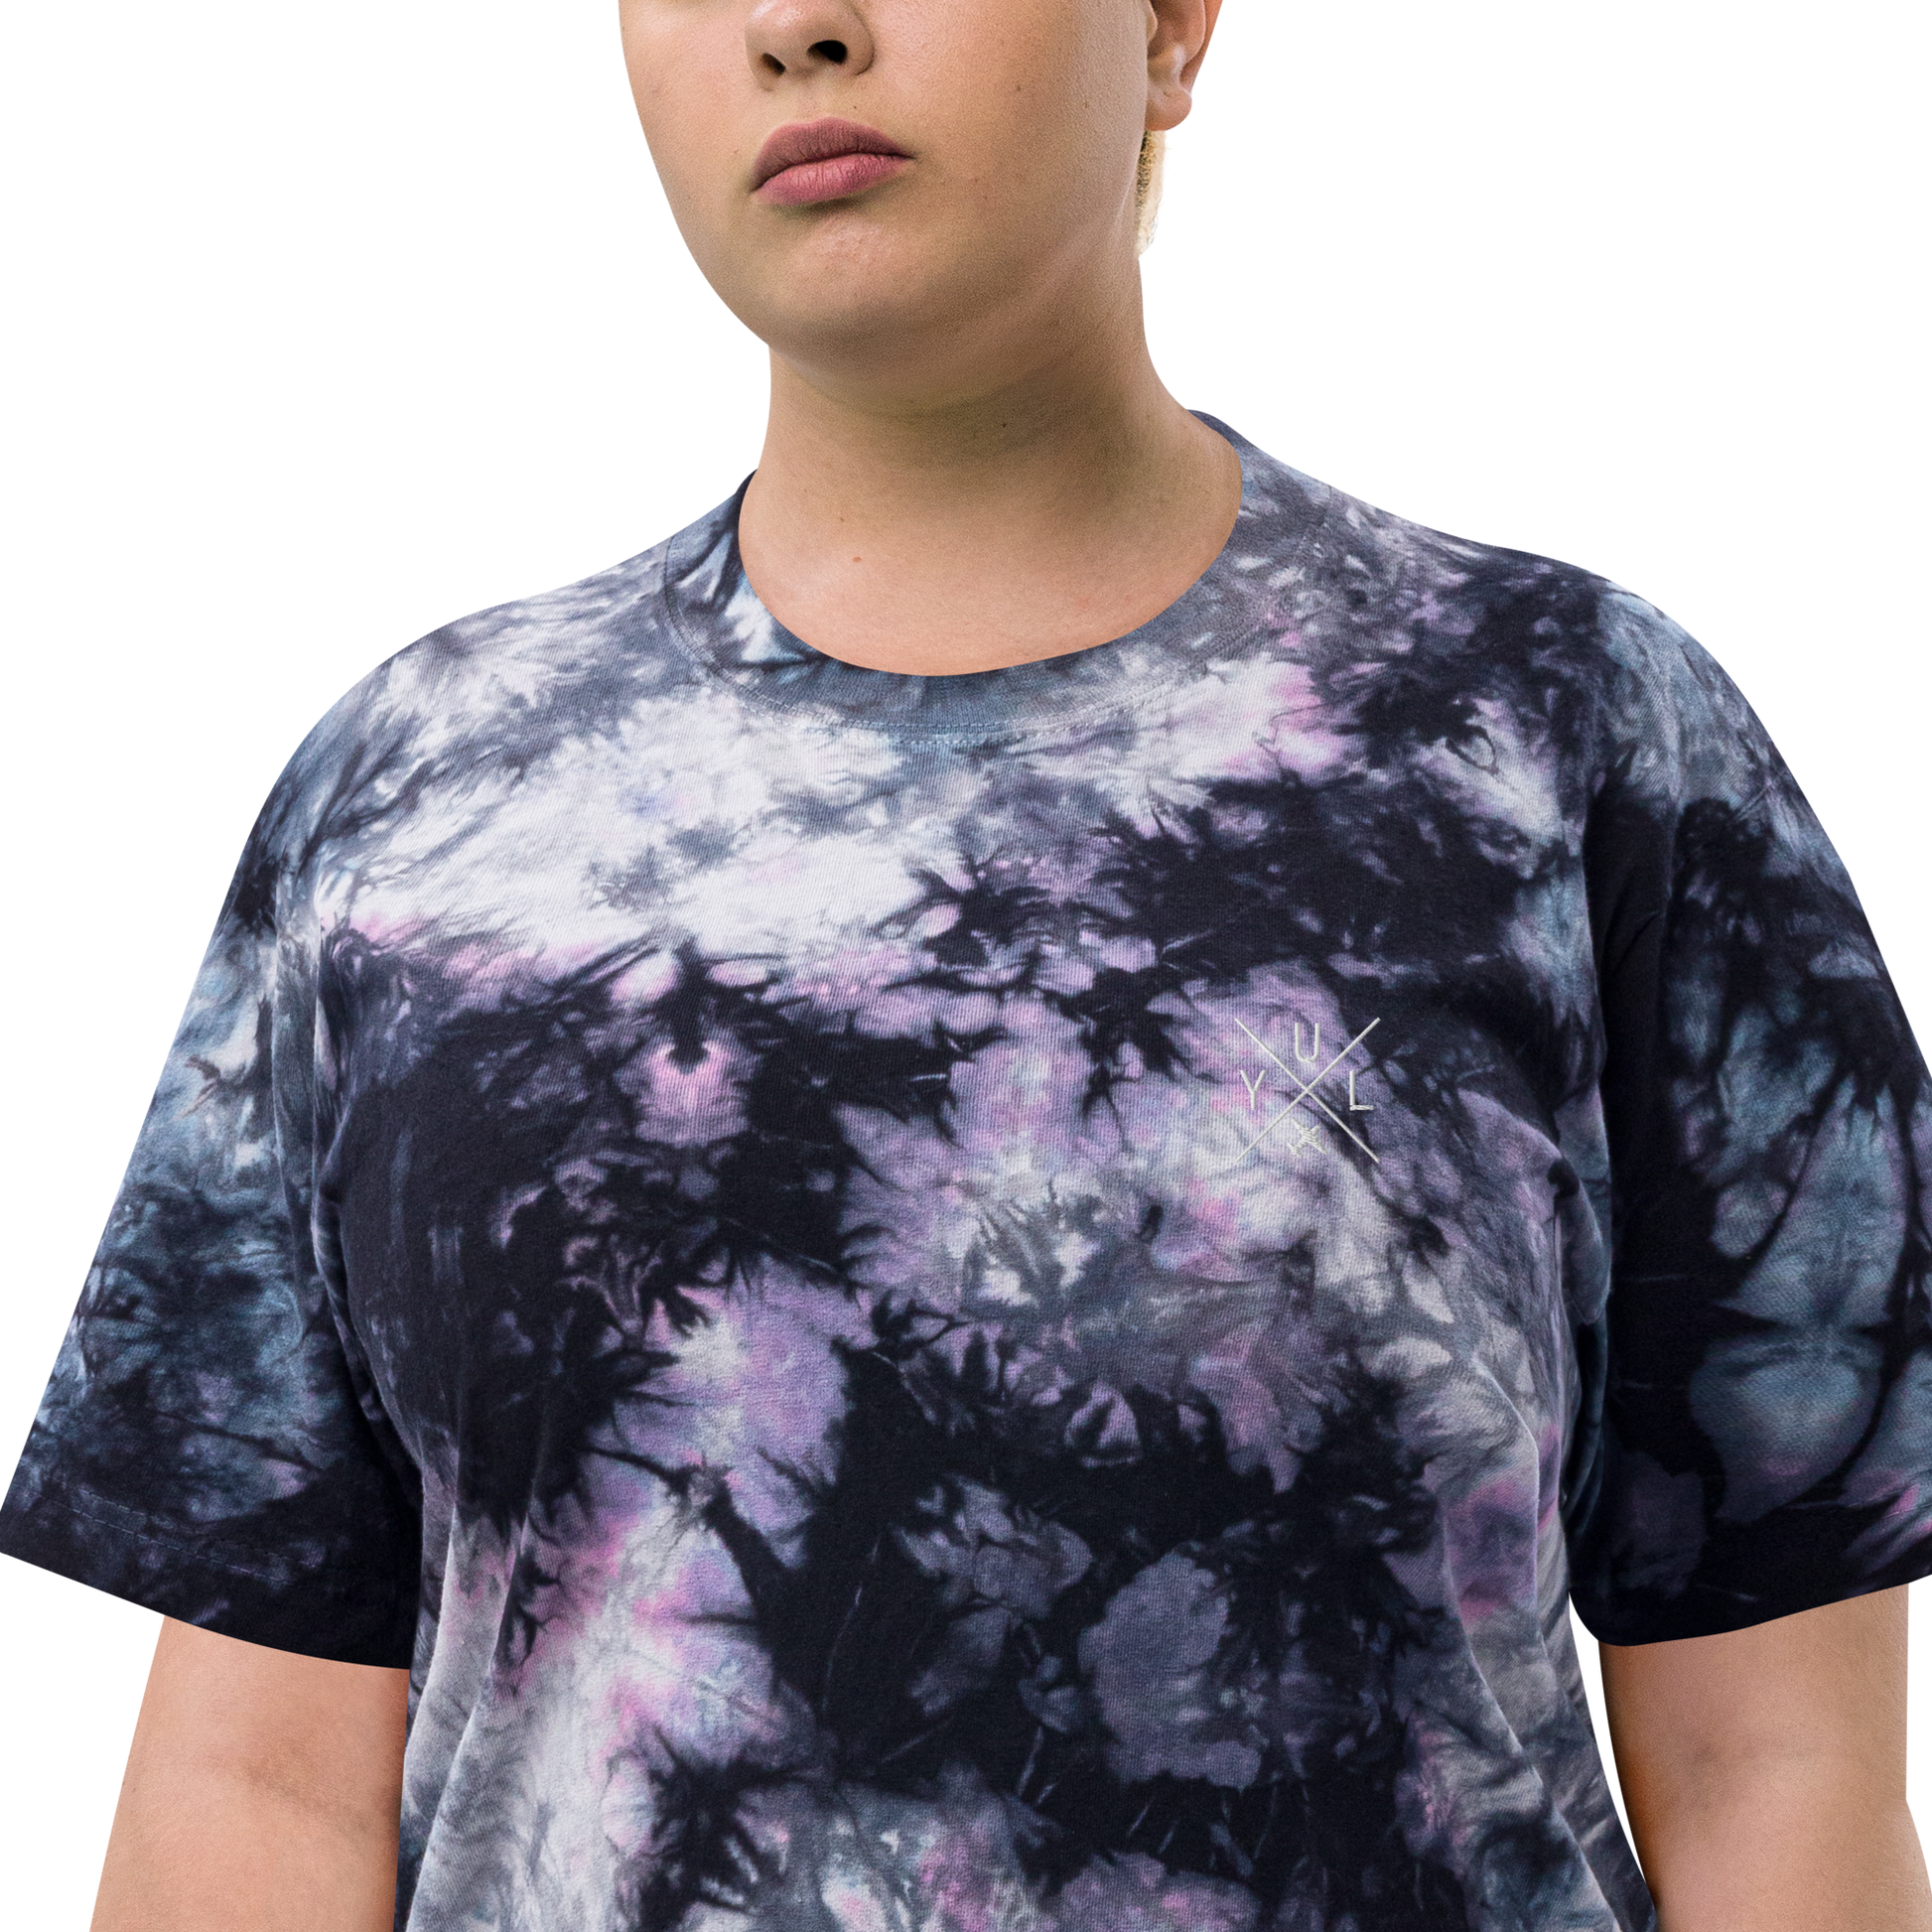 YHM Designs - YUL Montreal Oversized Tie-Dye T-Shirt - Crossed-X Design with Airport Code and Vintage Propliner - White Embroidery - Image 07